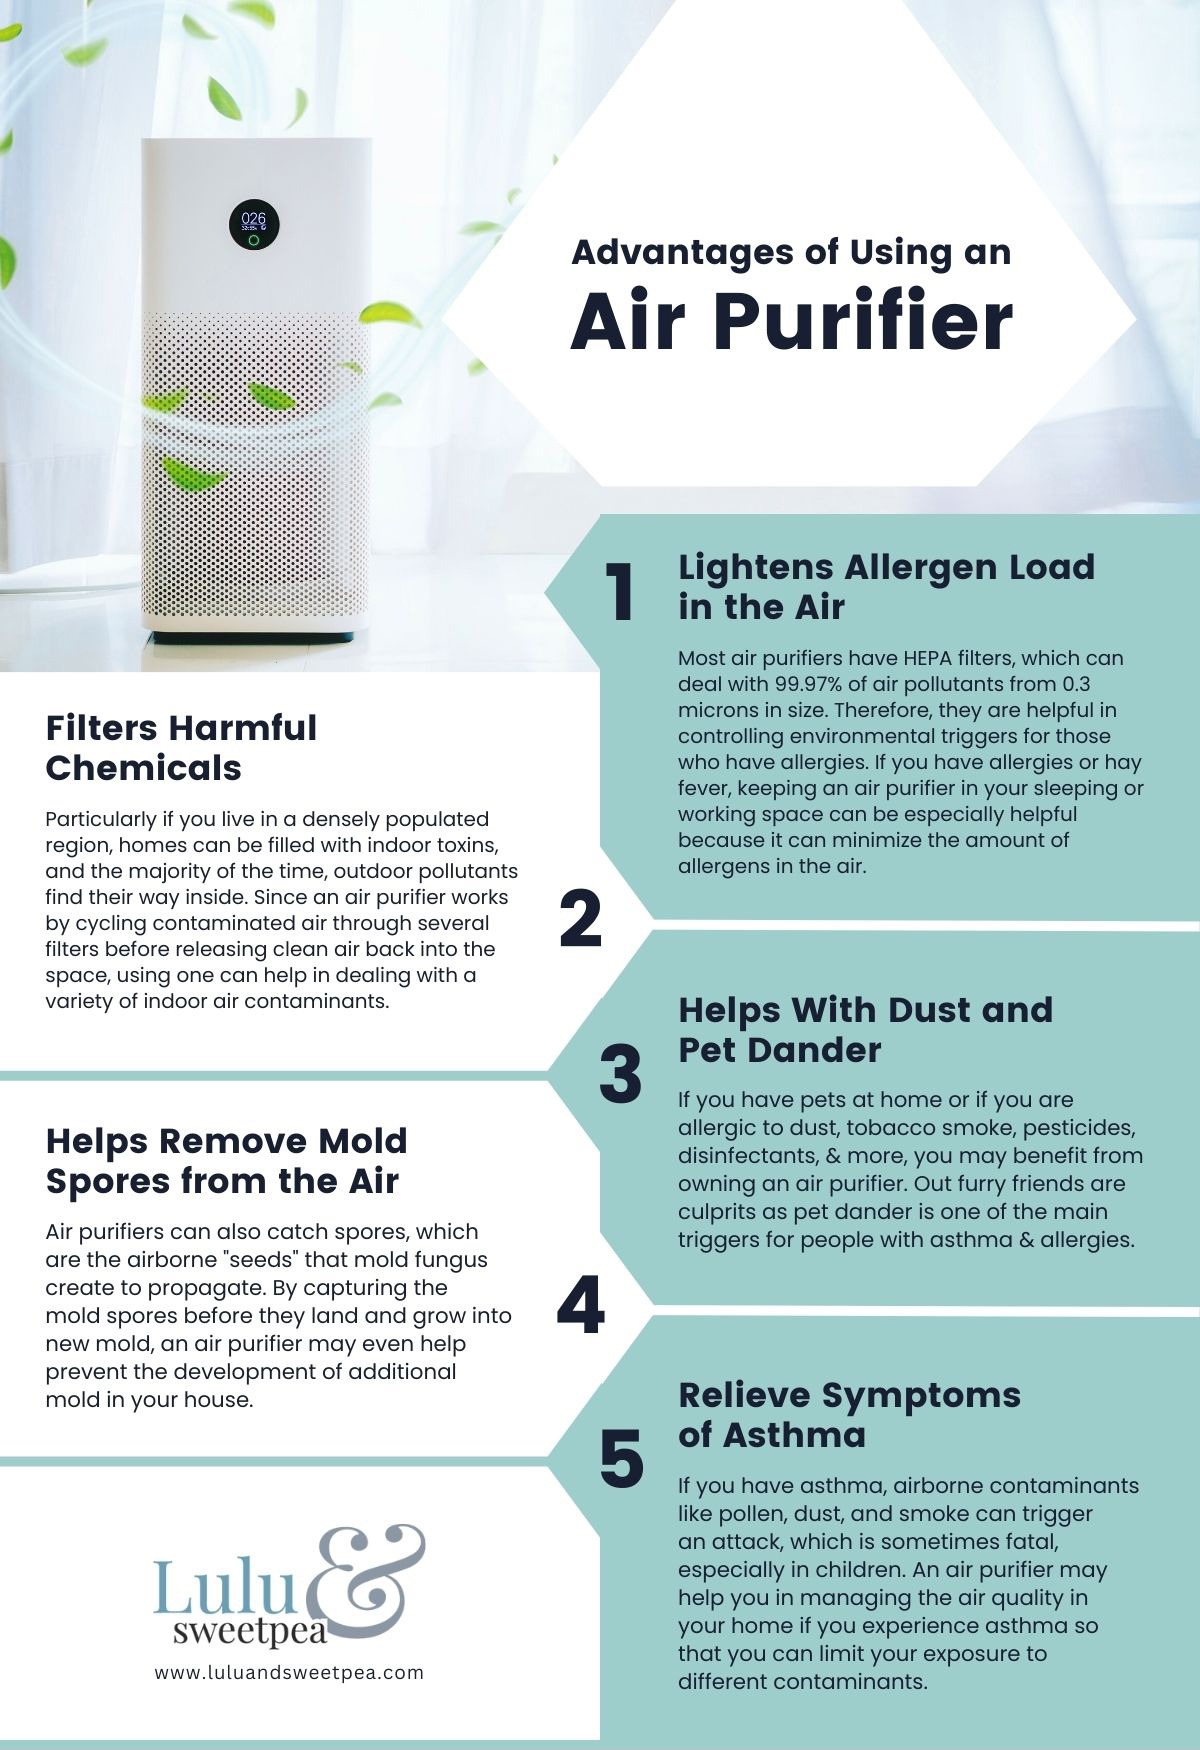 An explanation of the benefits of using an air purifier.